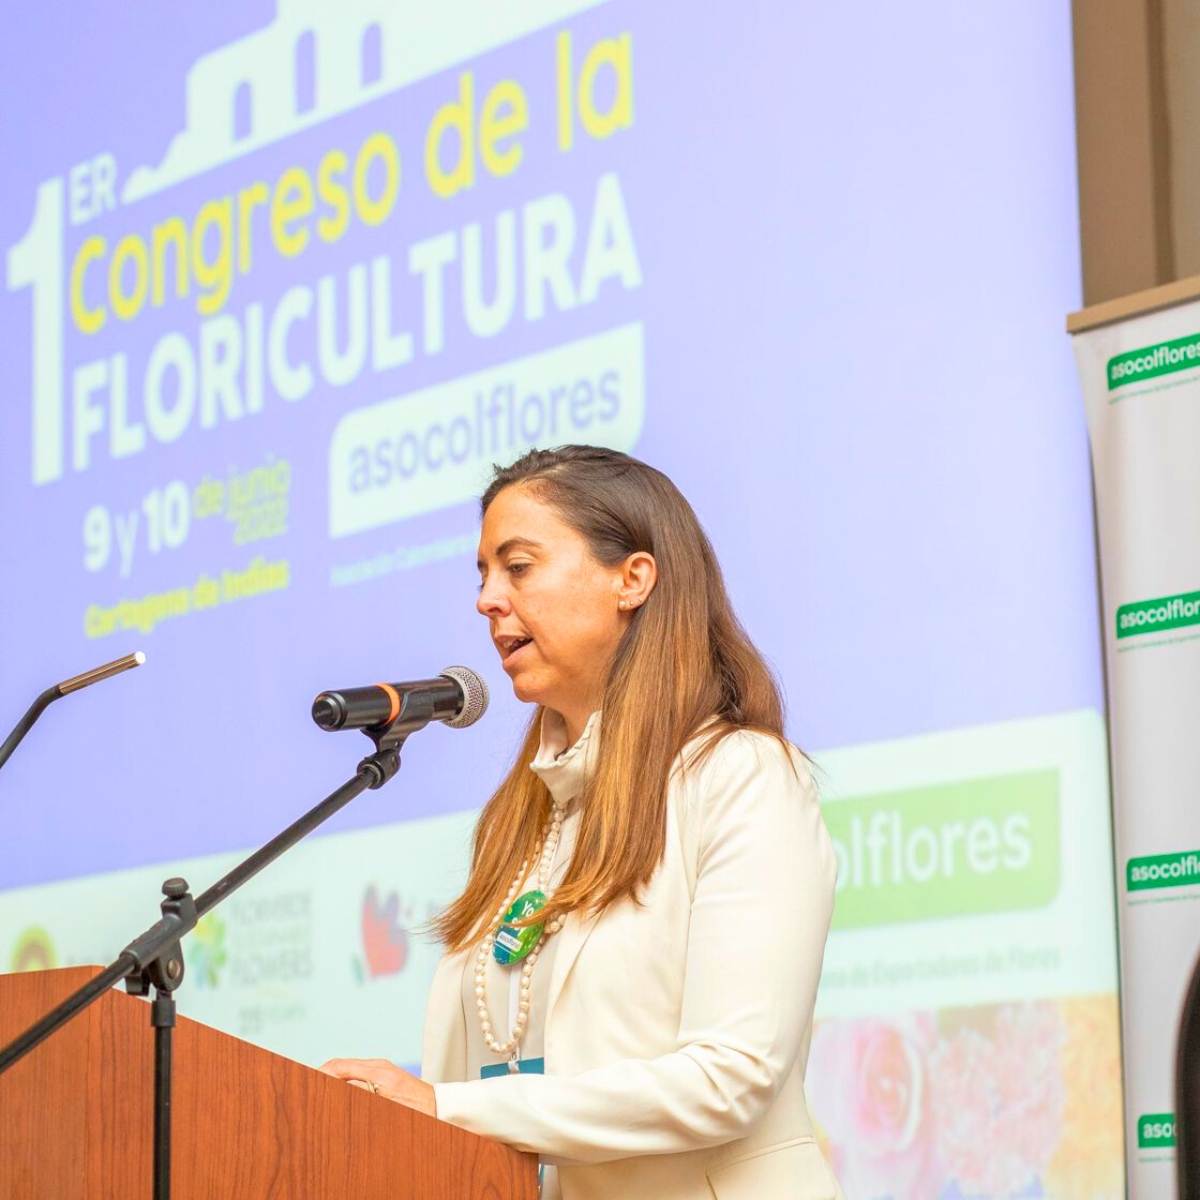 First Congress of Floriculture by Asocolflores